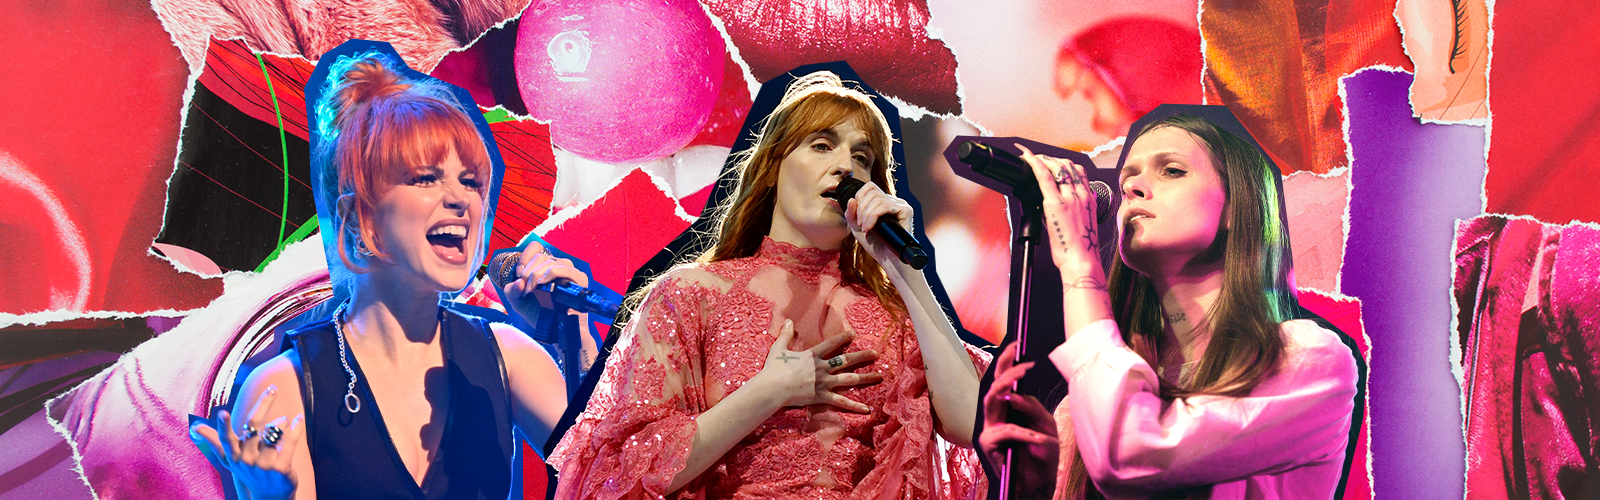 Hayley Williams, Florence Welch, Ethel Cain